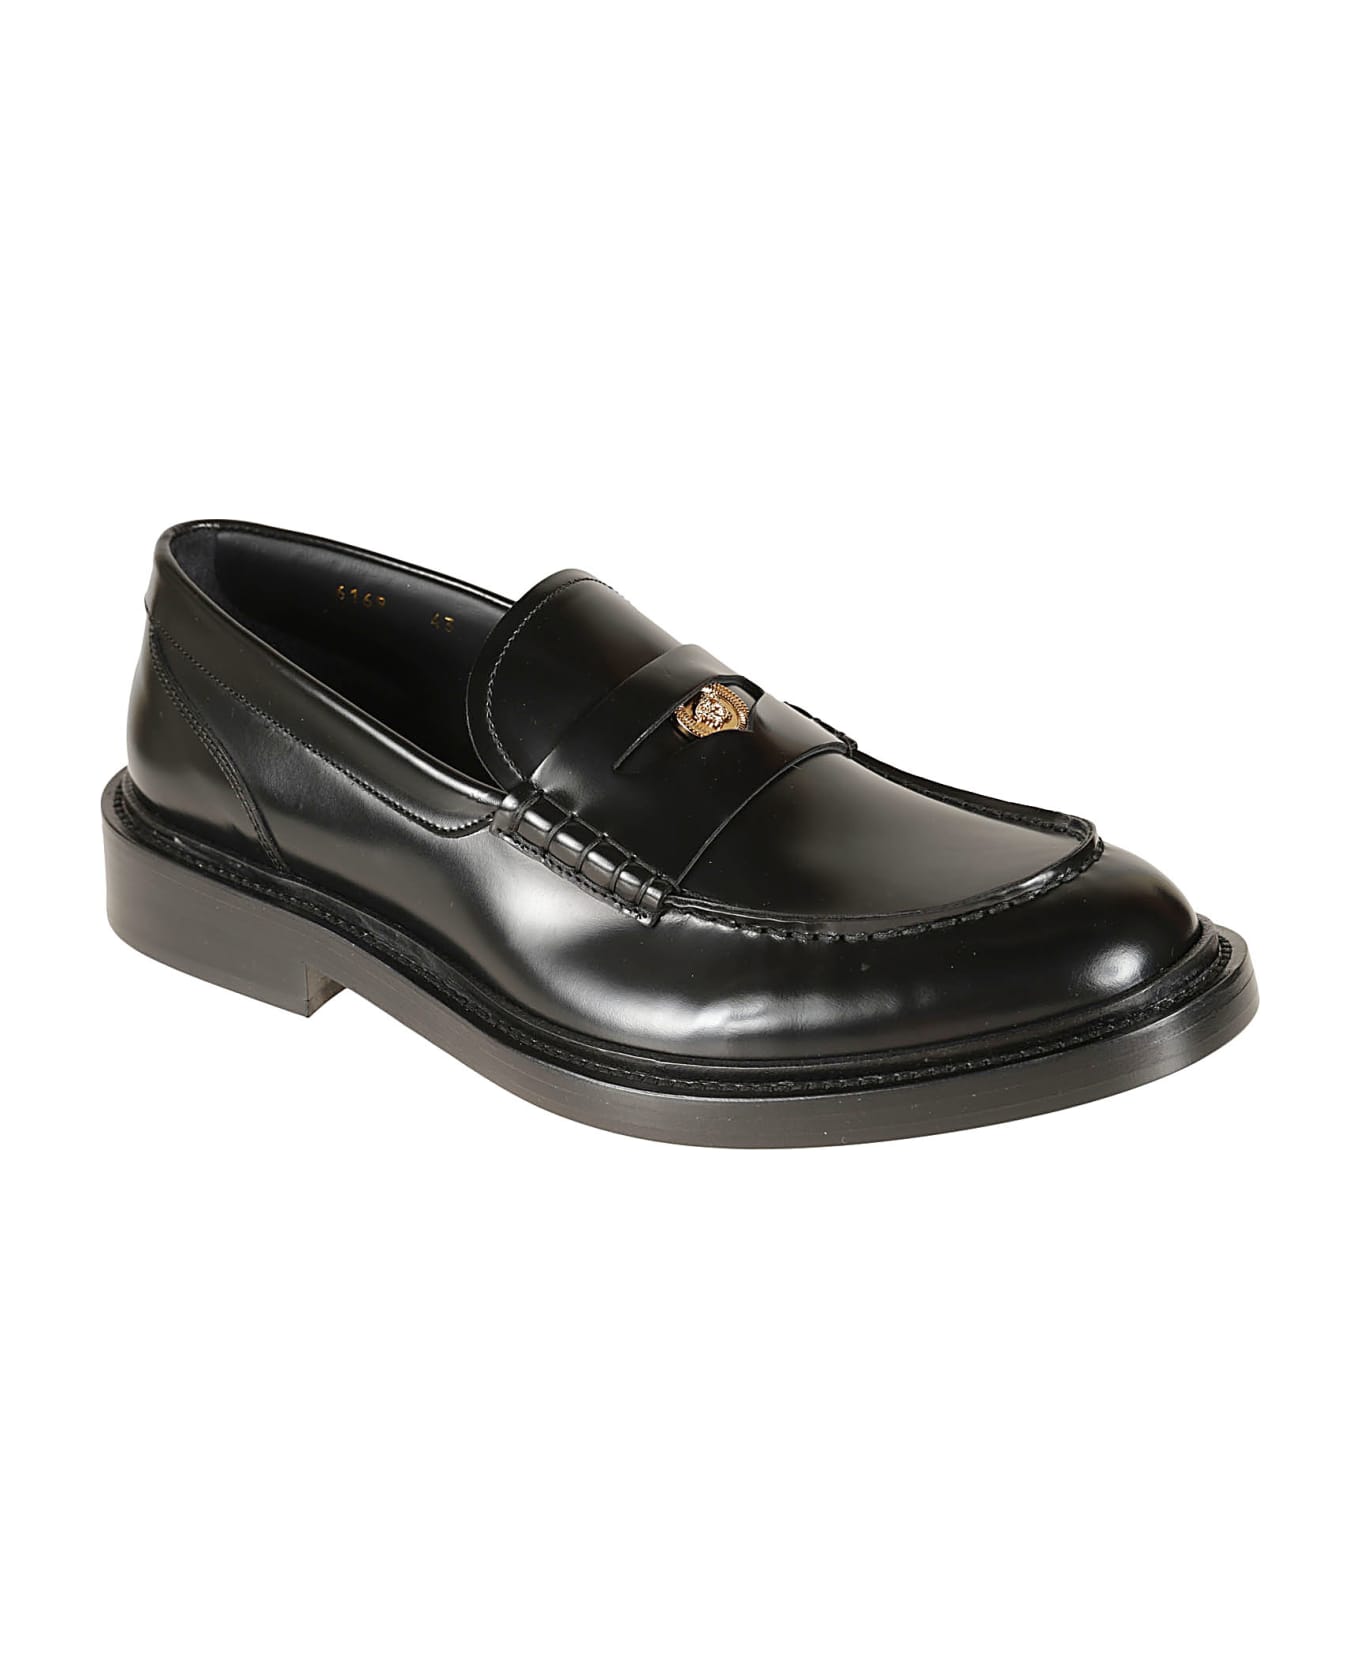 Versace Logo Classic Slide-on Loafers - Black/Gold